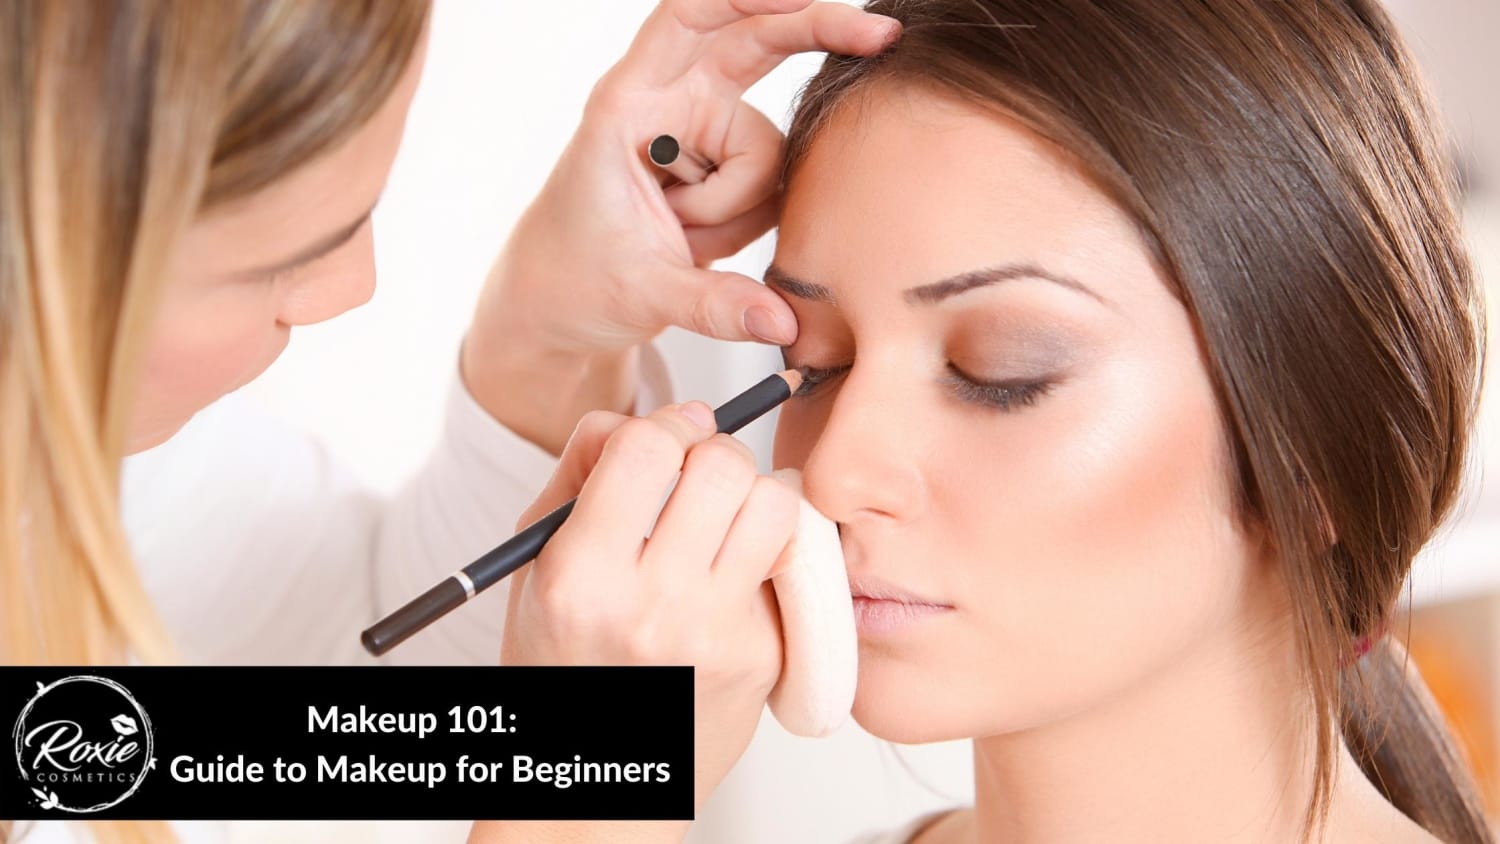 Makeup 101: Your Easy Step-by-Step Guide to Makeup for Beginners